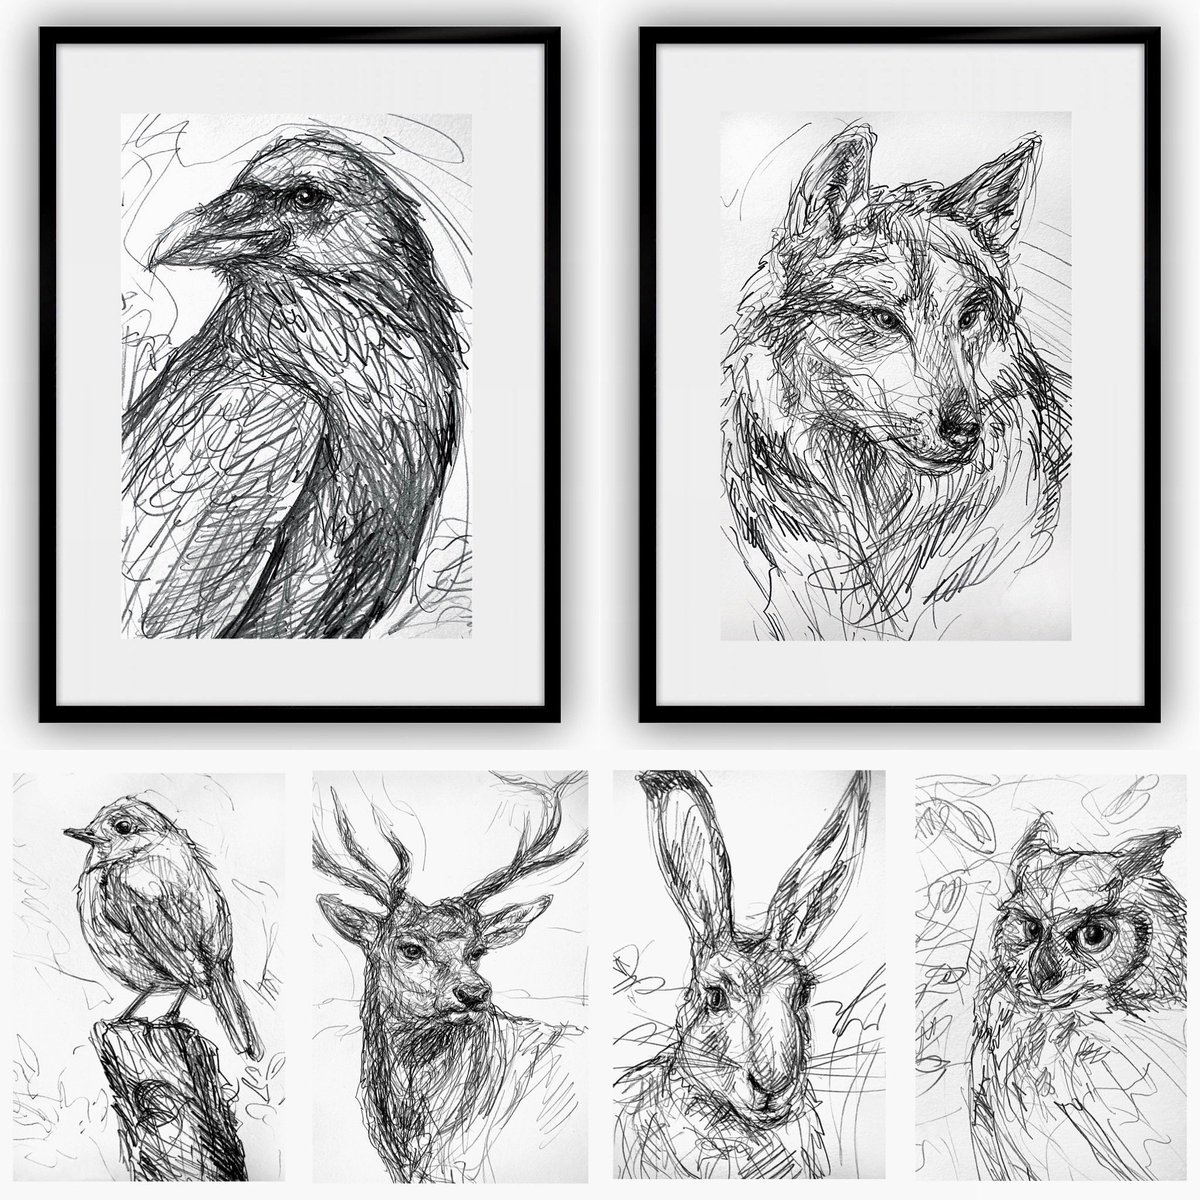 All open edition prints 20% off. Order before 6th of June!✏️#pencildrawing #animaldrawing #raven #wolf #robin #deer #hare #owl #openeditionprint

ibiaru.com/open-edition